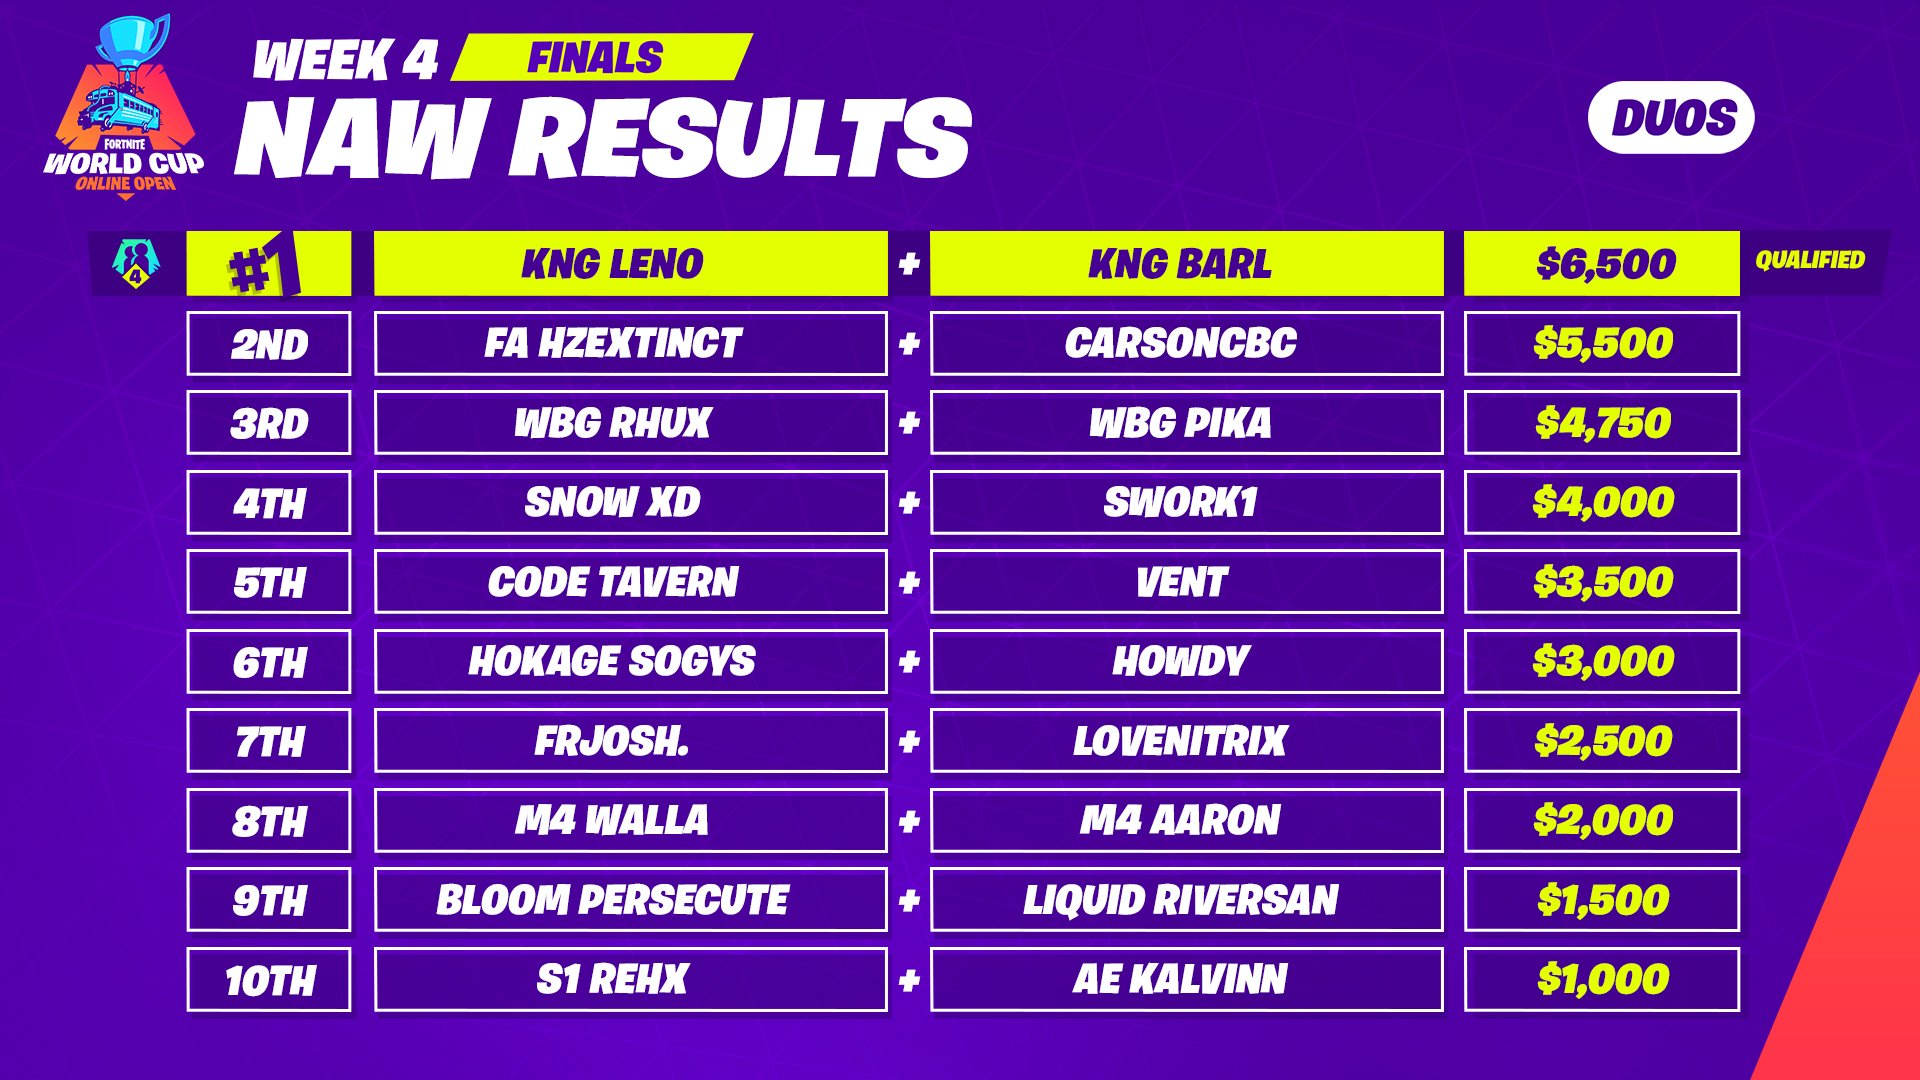 na east results - world cup fortnite prize pool duo